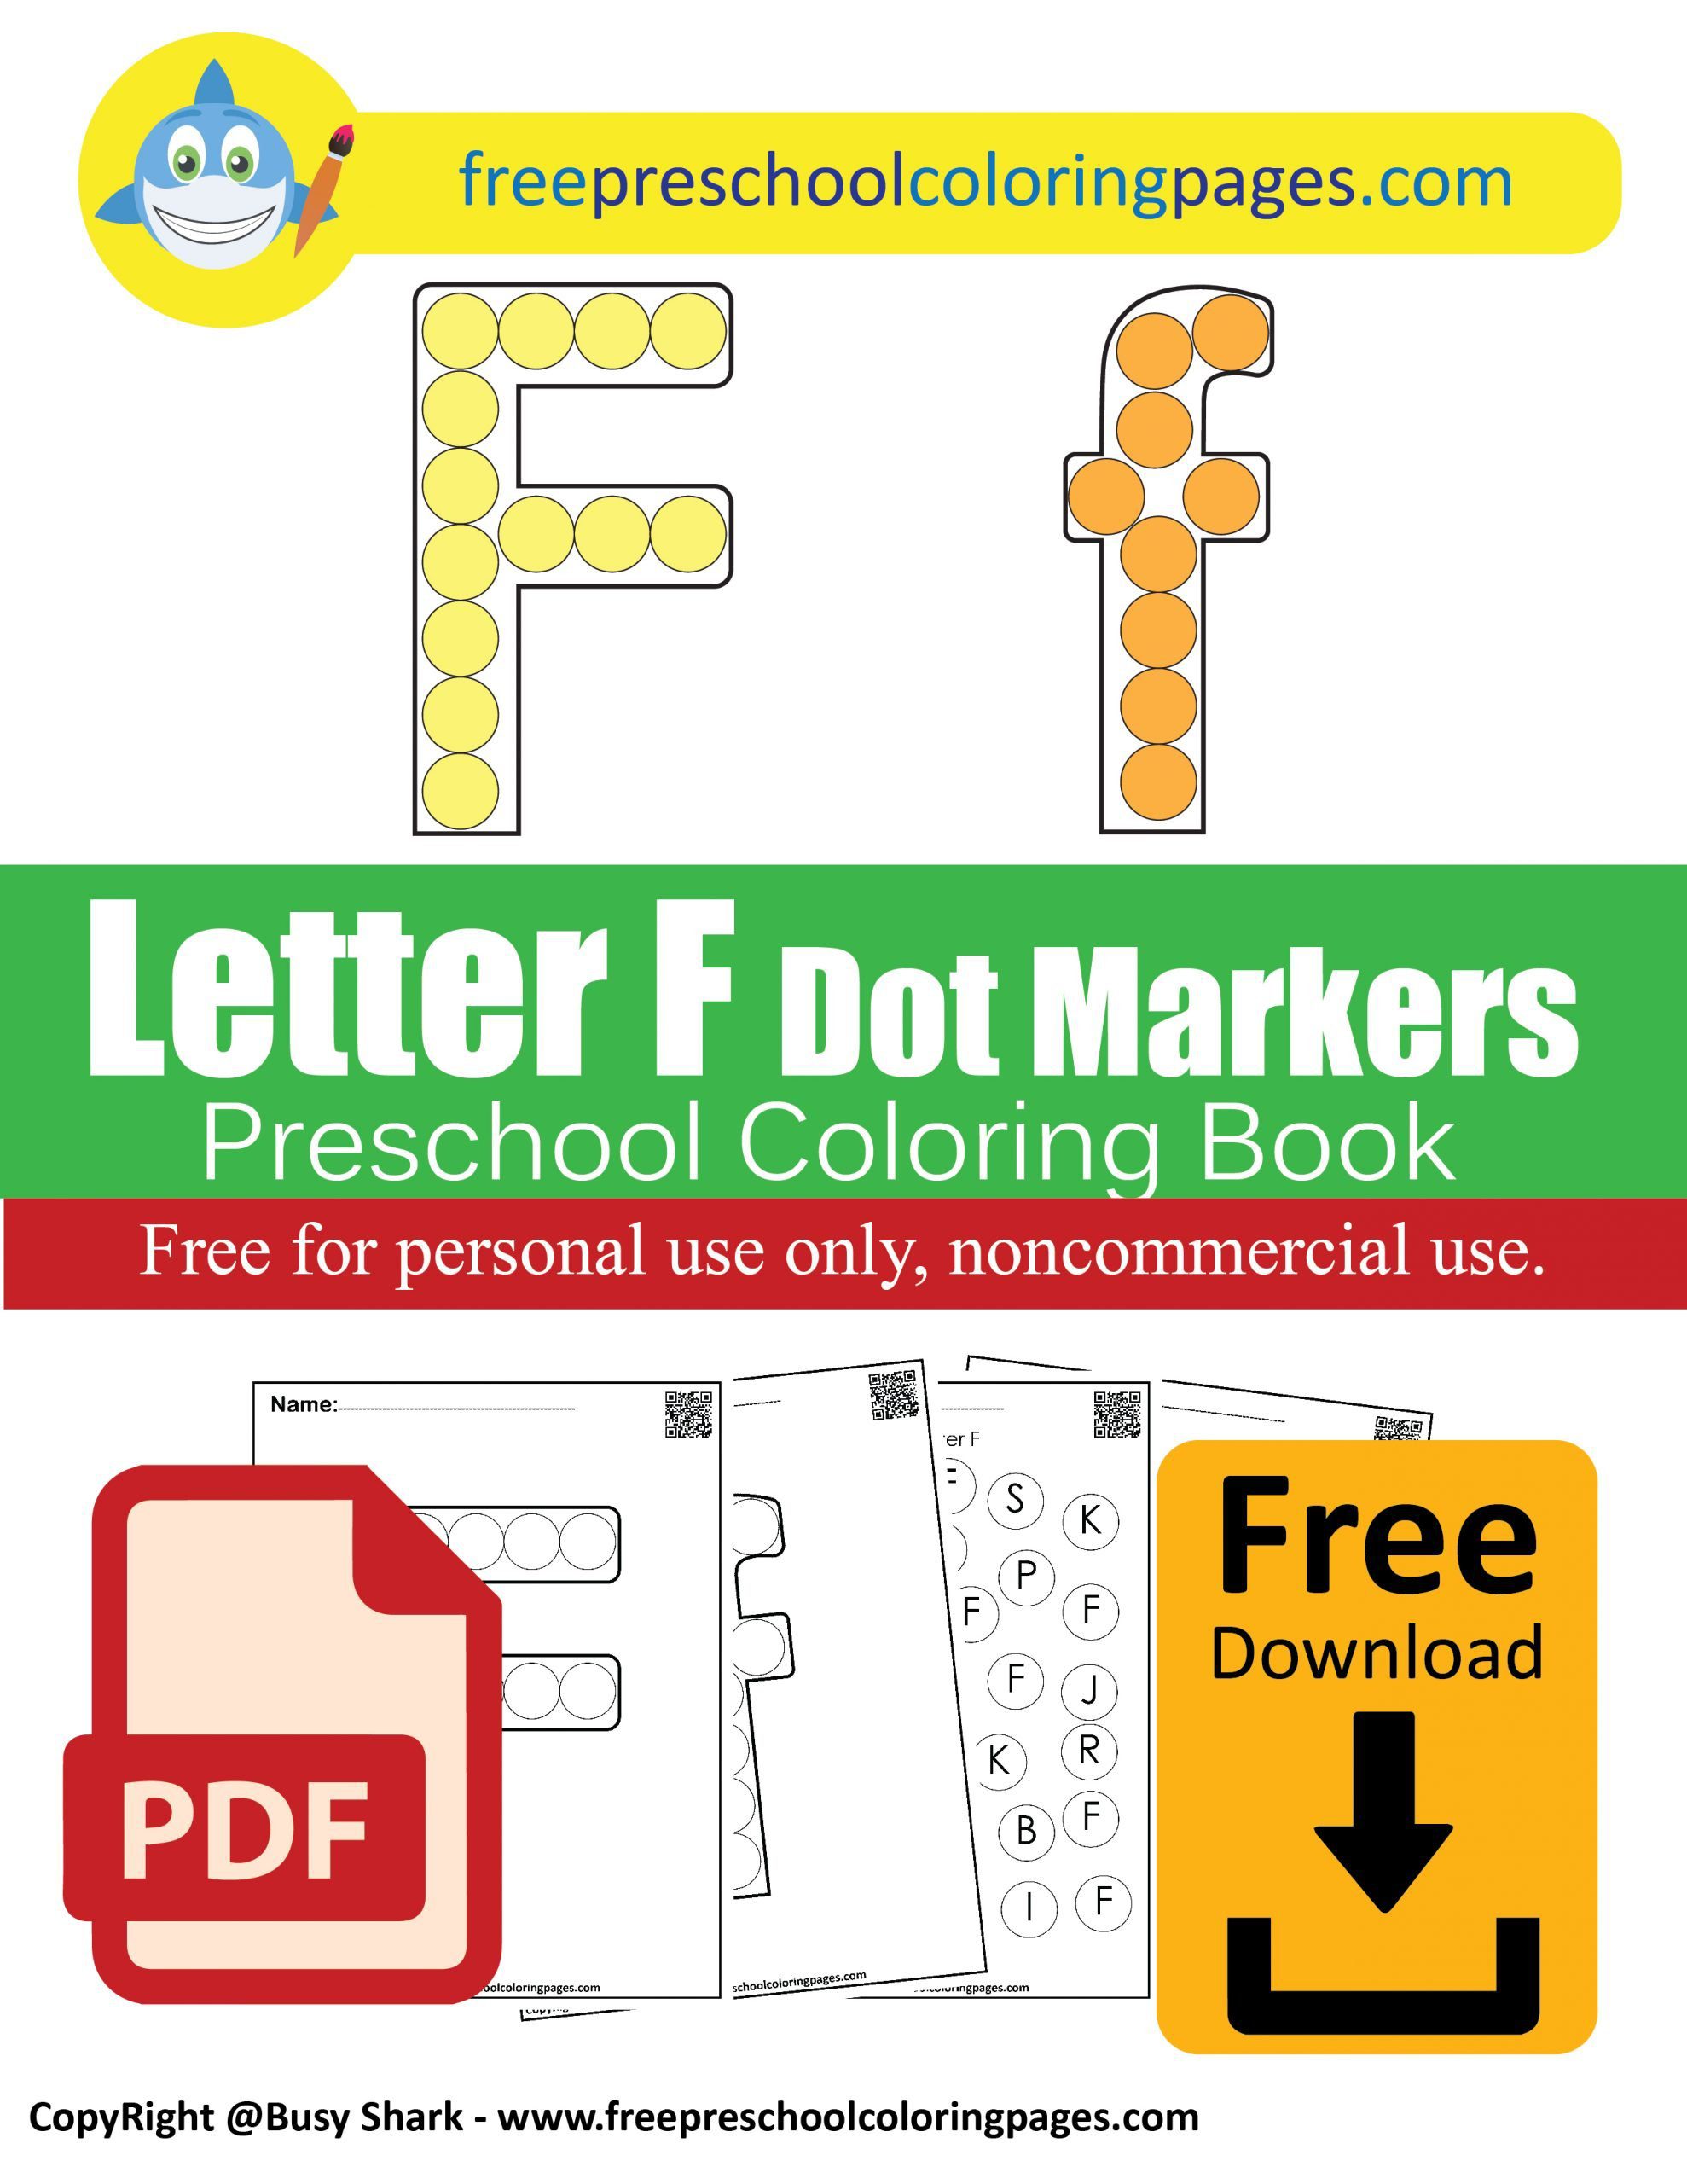 Letter f dot markers free coloring pages